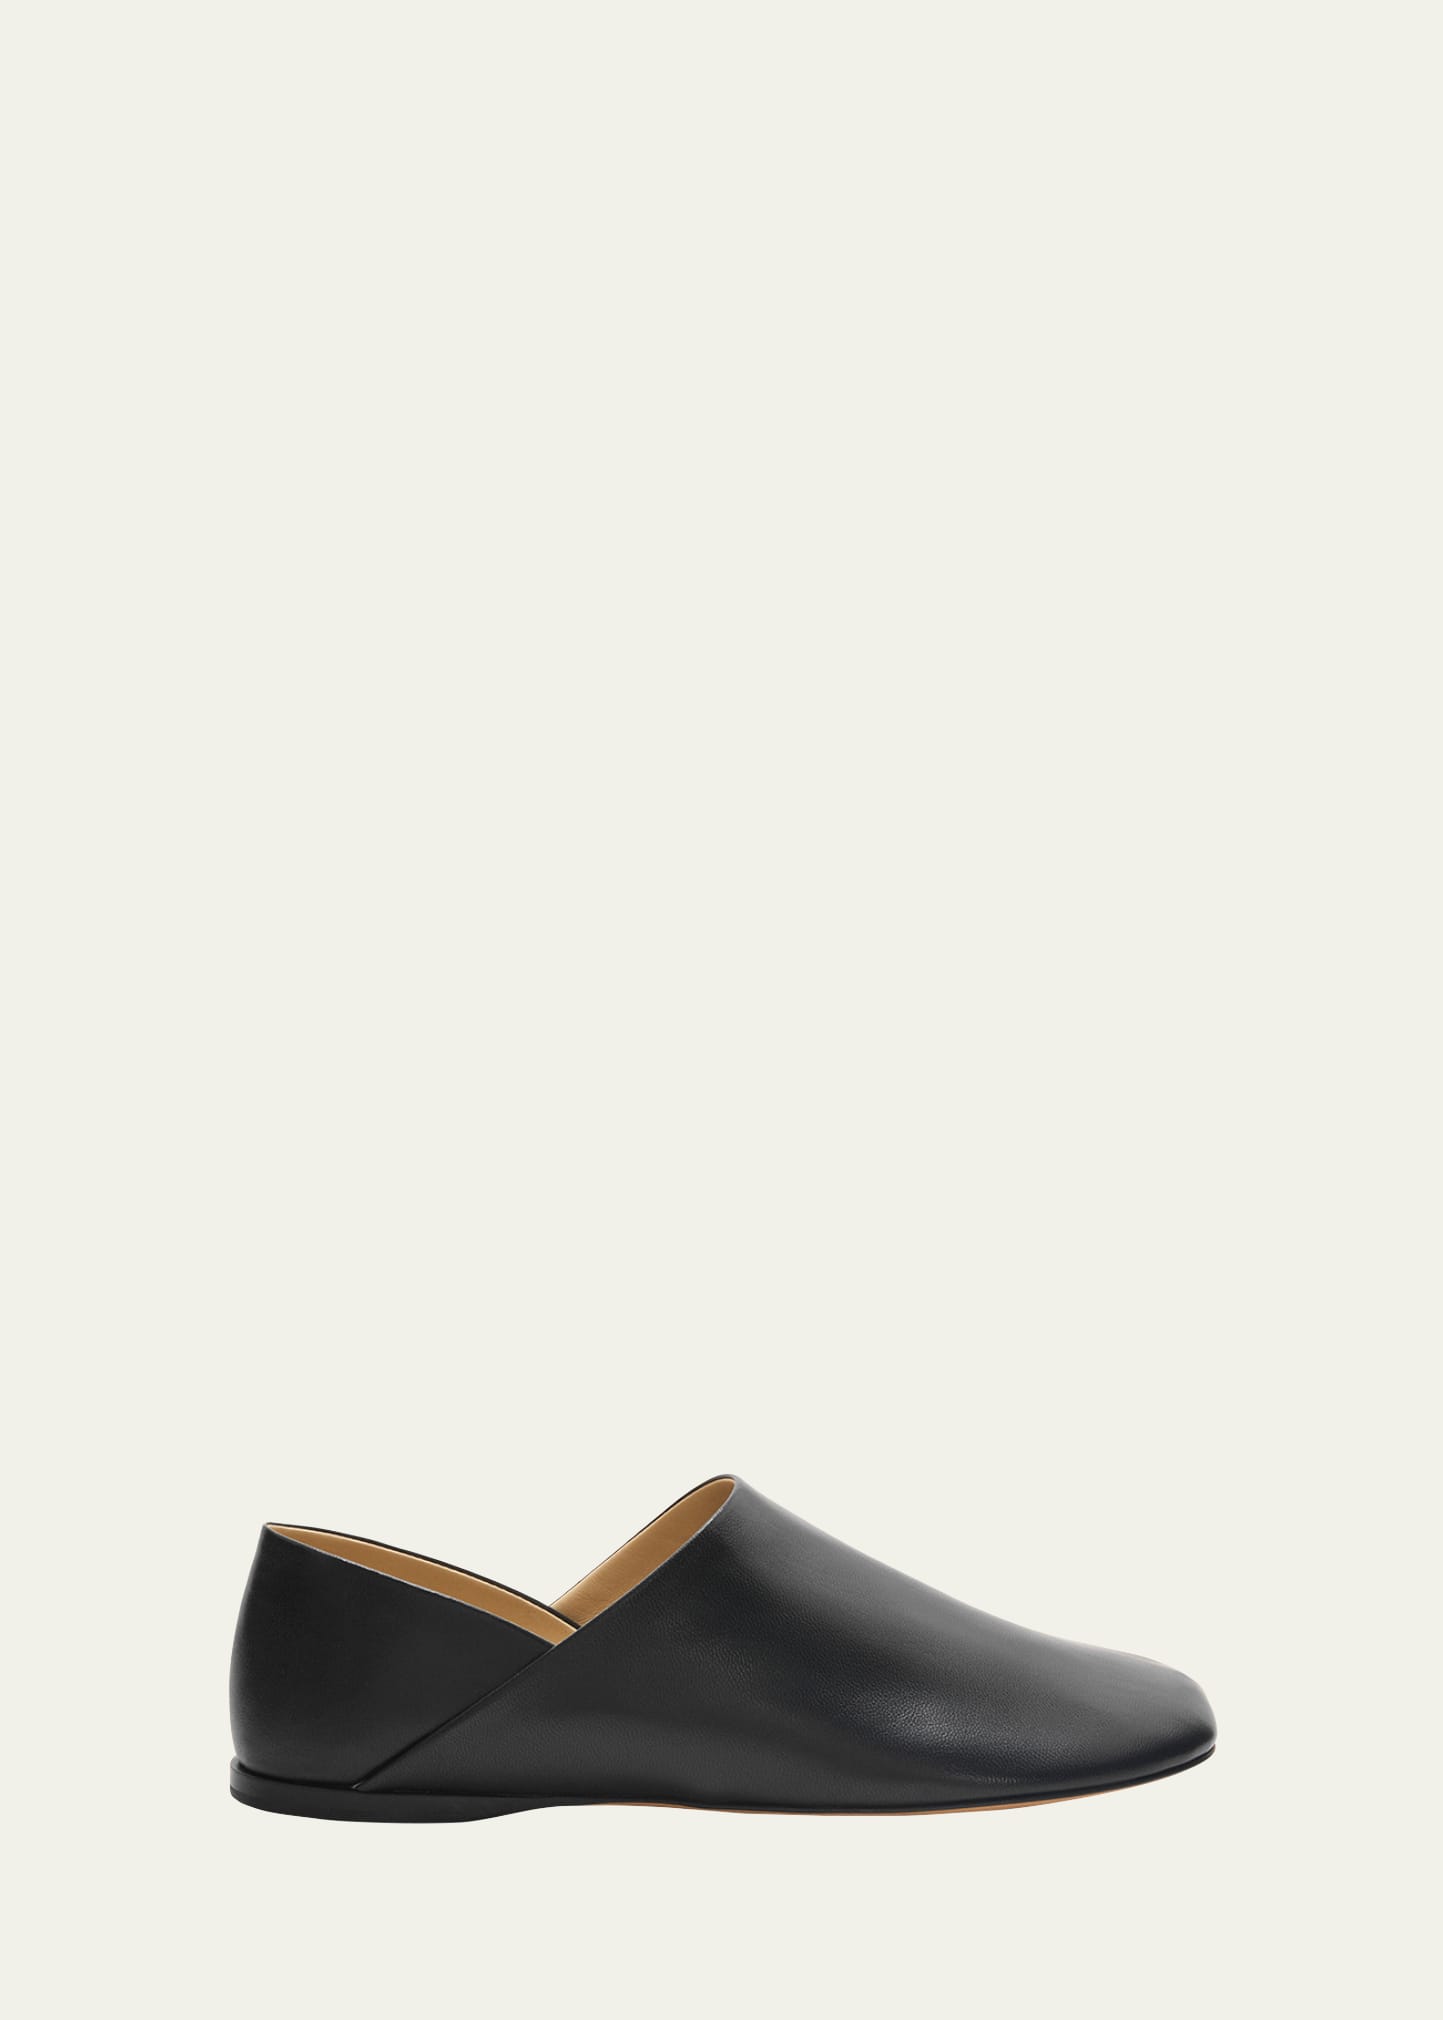 Loewe Toy Leather Slipper Loafers In 1100 Black